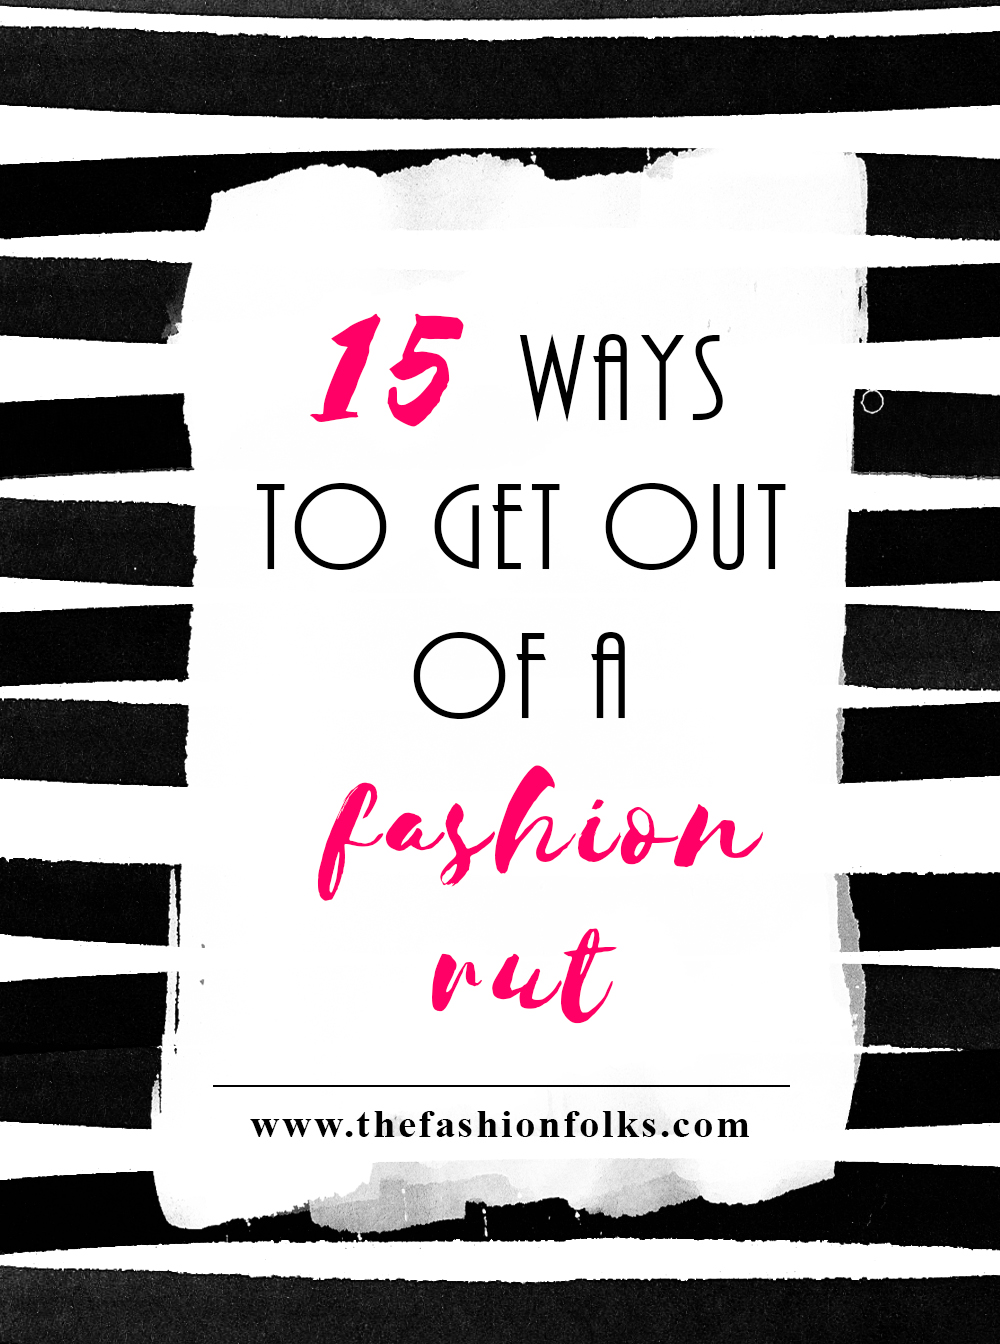 15 ways to get out of a fashion rut + idea to get inspiration and how to stay inspired | The Fashion Folks